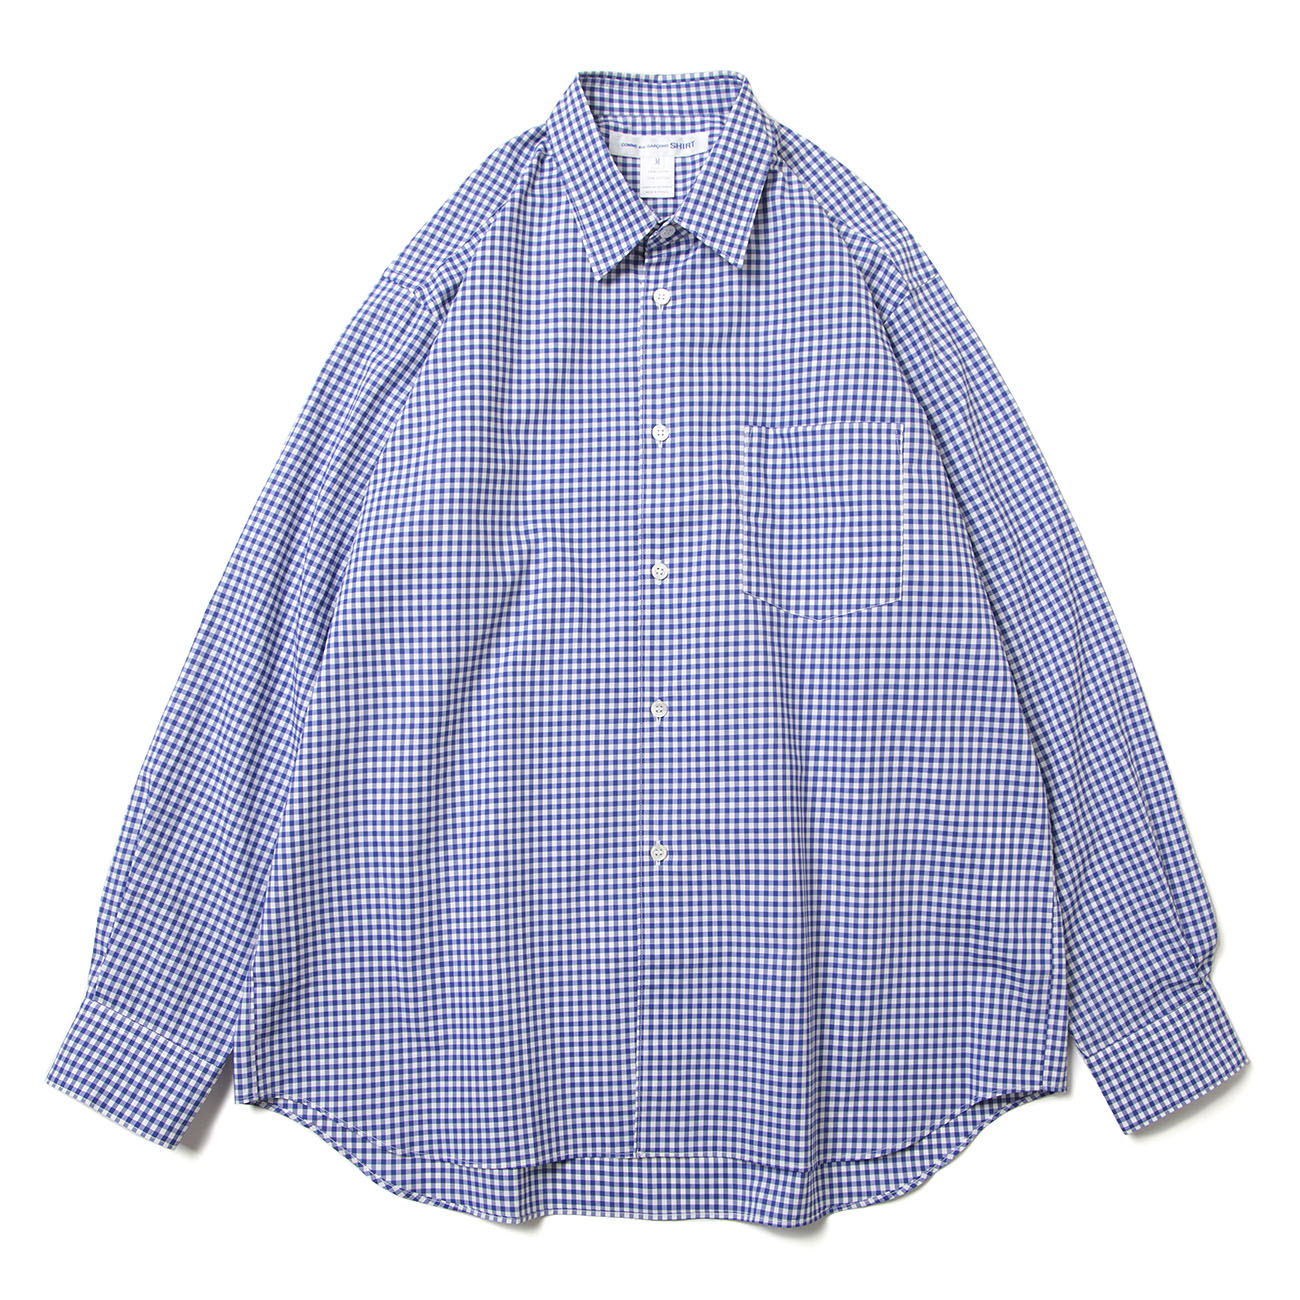 FOREVER / Wide Classic - yarn dyed cotton small check - White / Navy